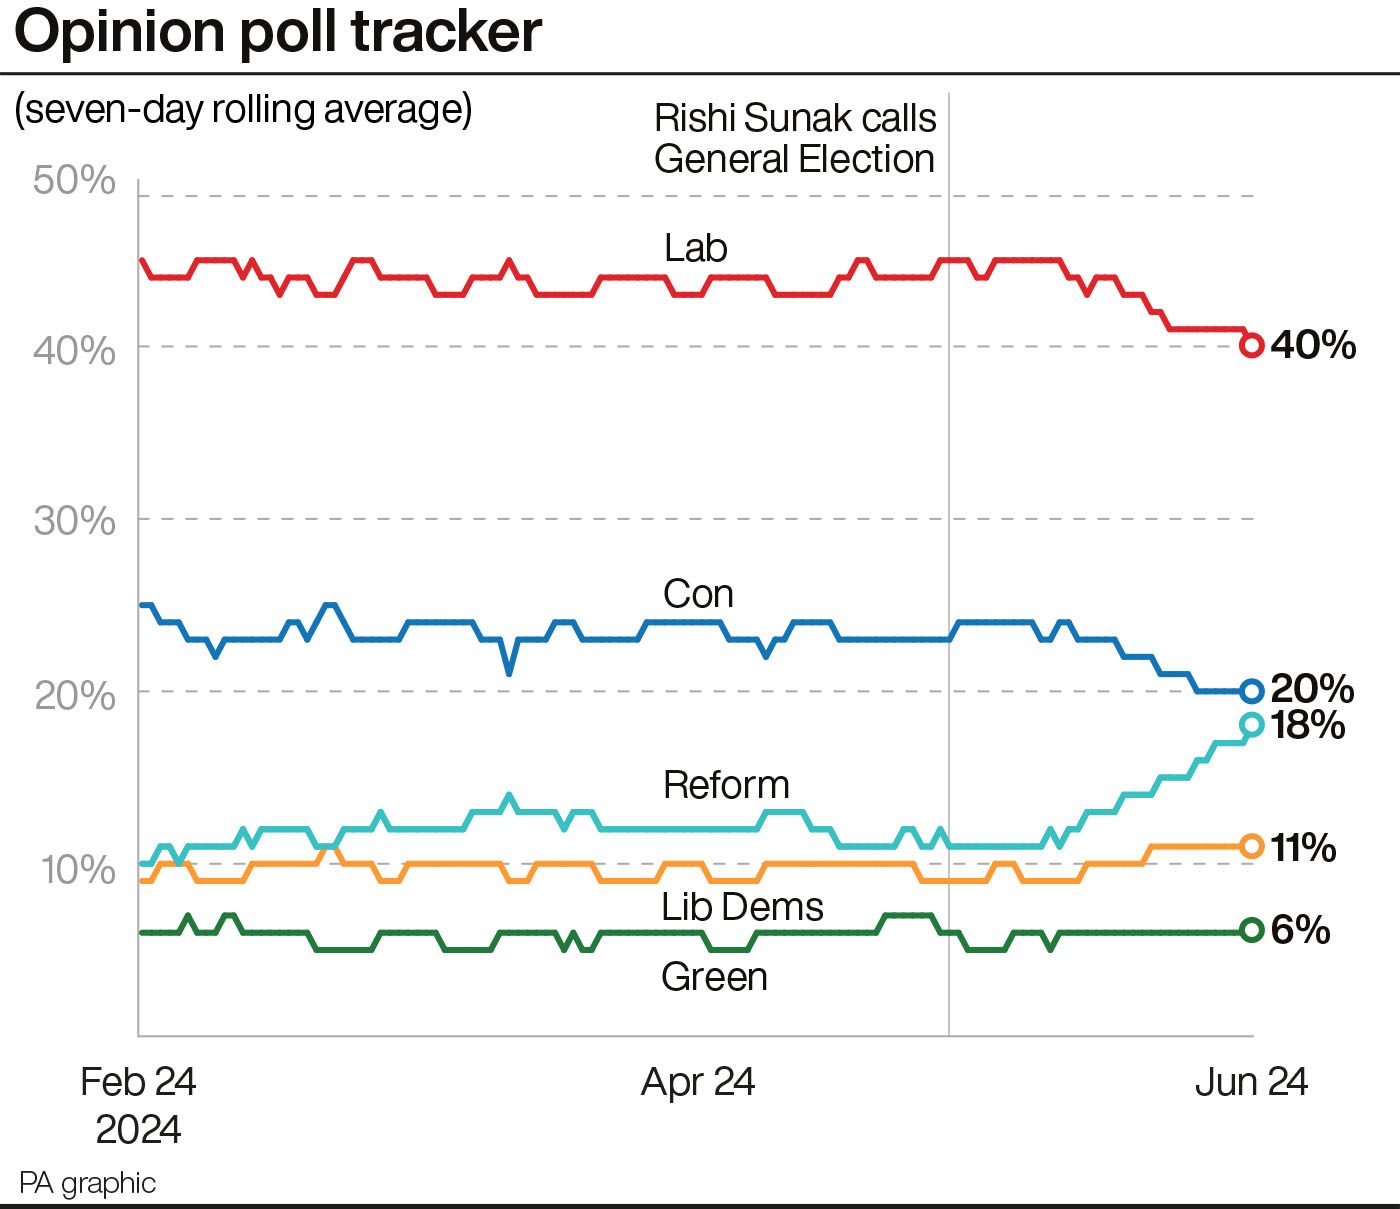 A graph showing the latest opinion poll average for the main political parties, with Labour on 40%, 20 points ahead of the Conservatives on 20%, followed by Reform on 18%, the Lib Dems on 11% and the Greens on 6%